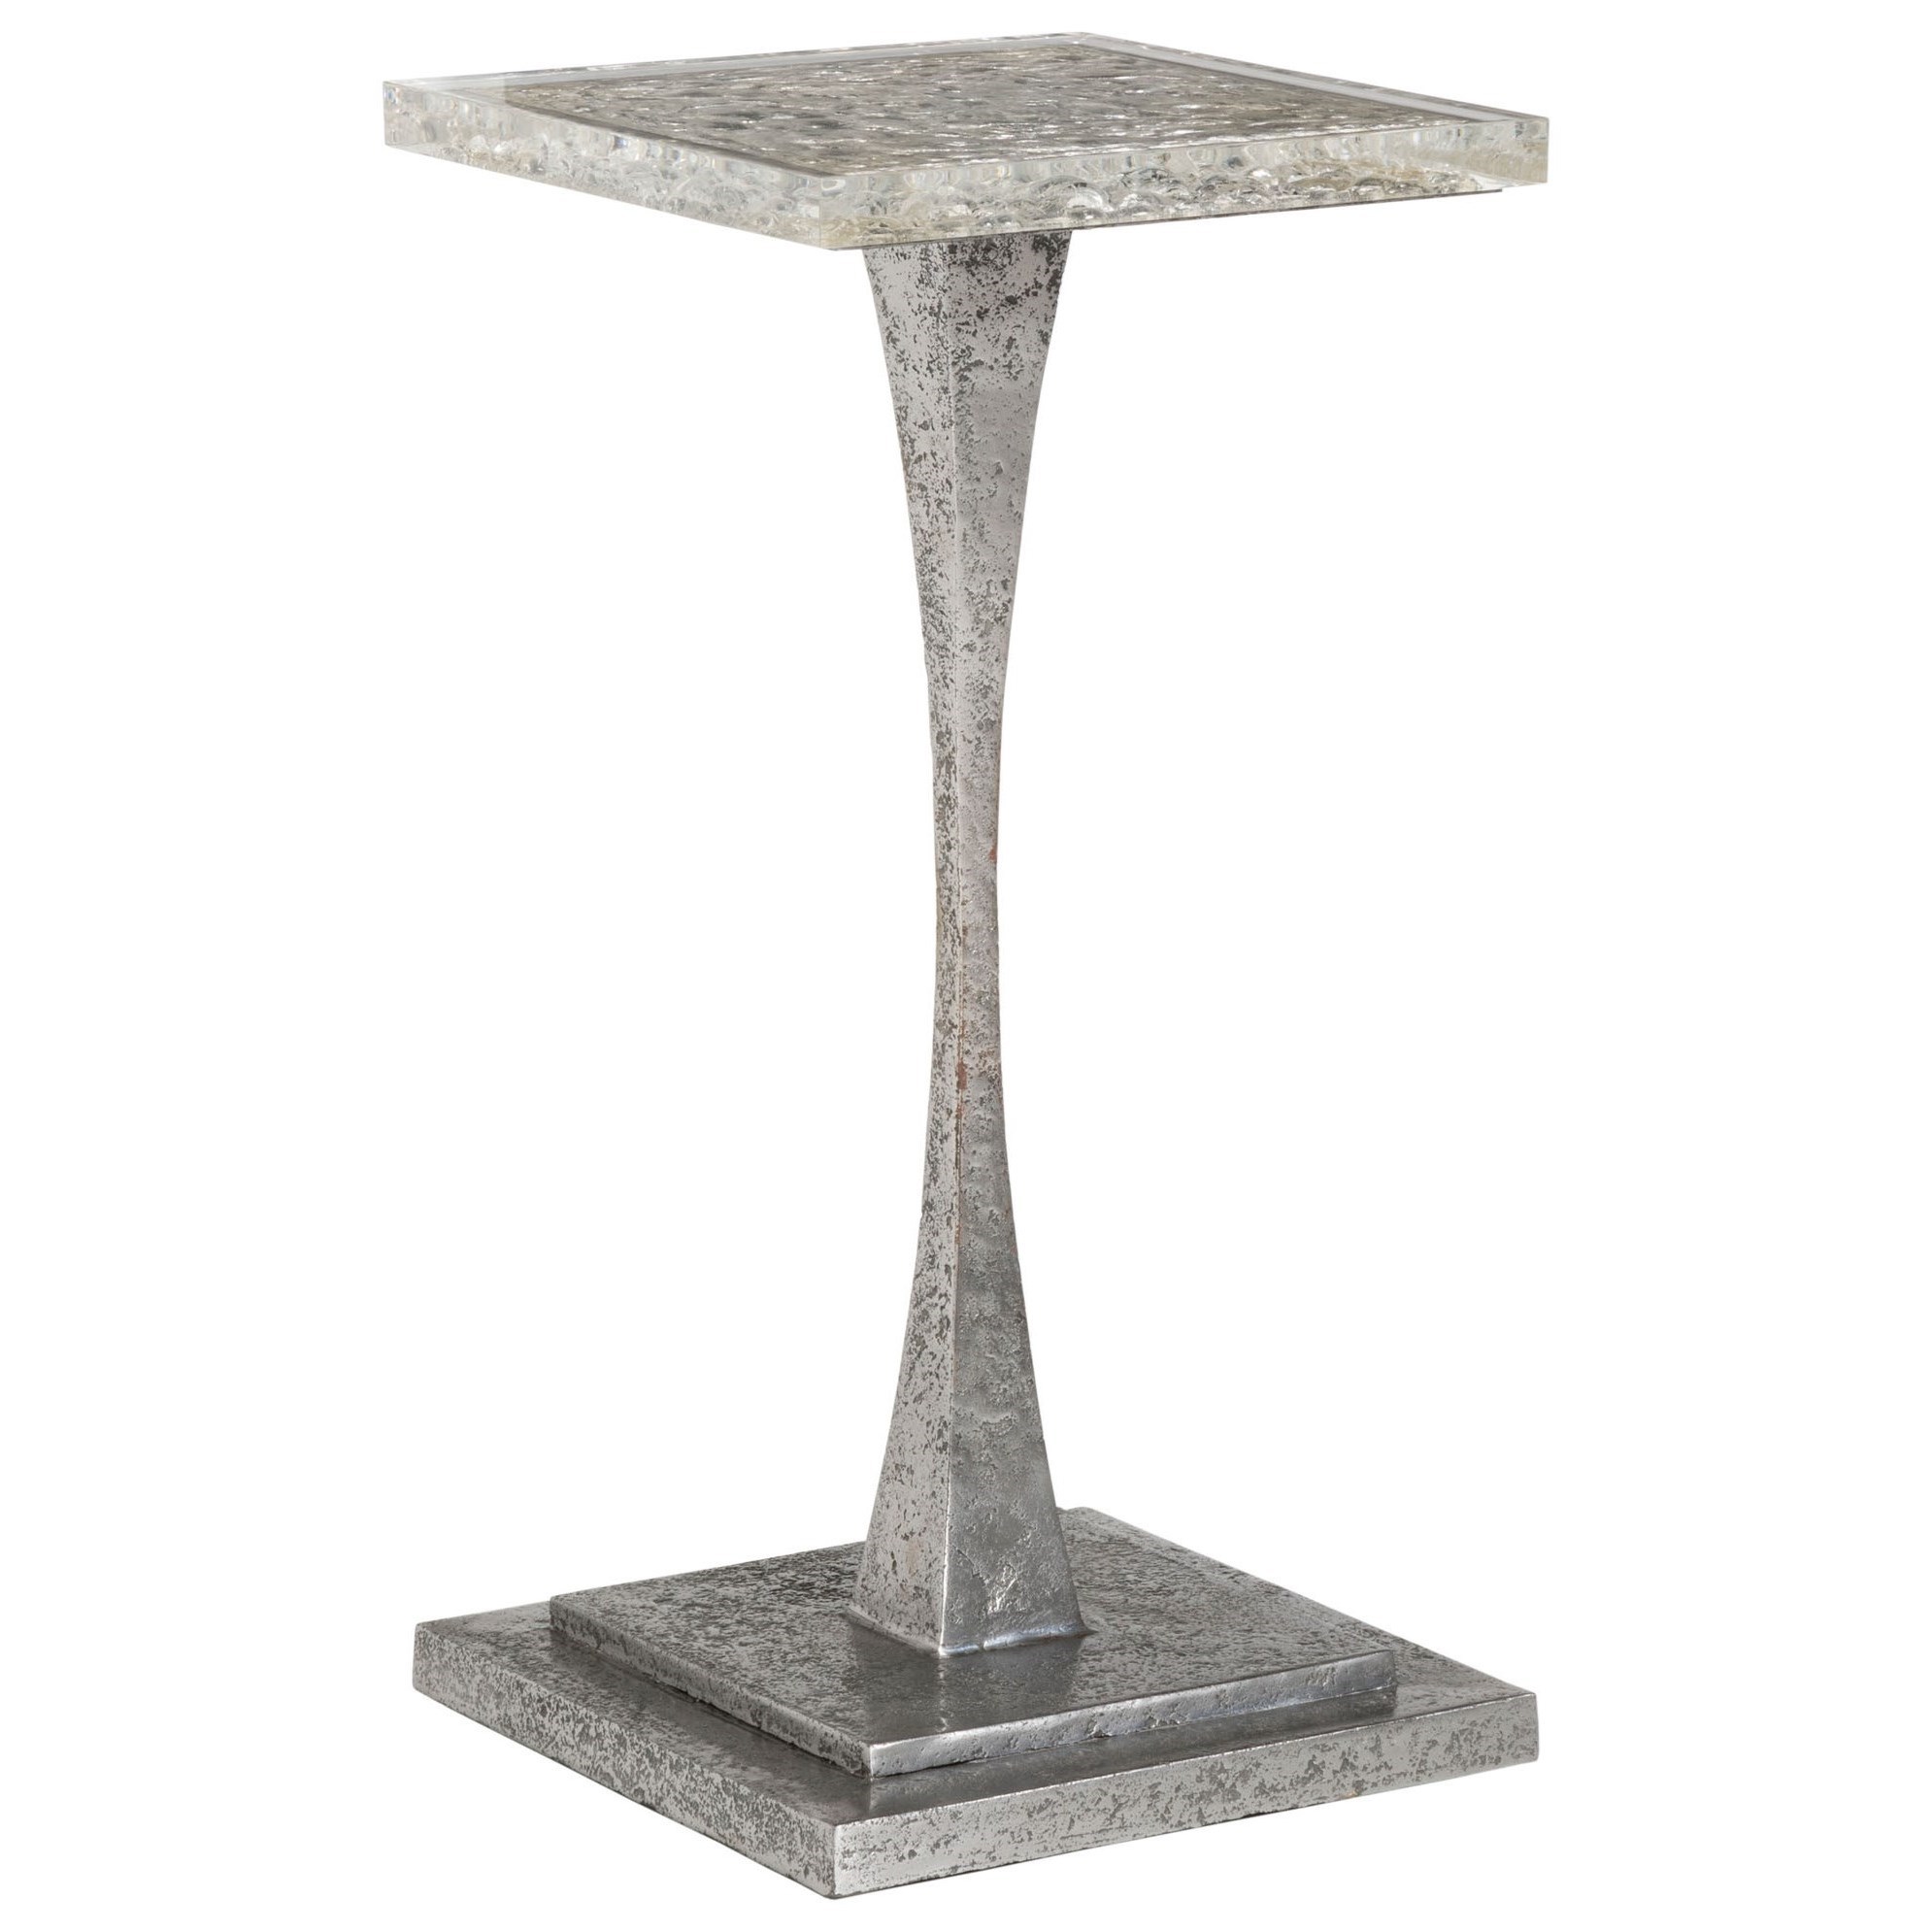 Contemporary Metal and Acrylic Square Spot Table